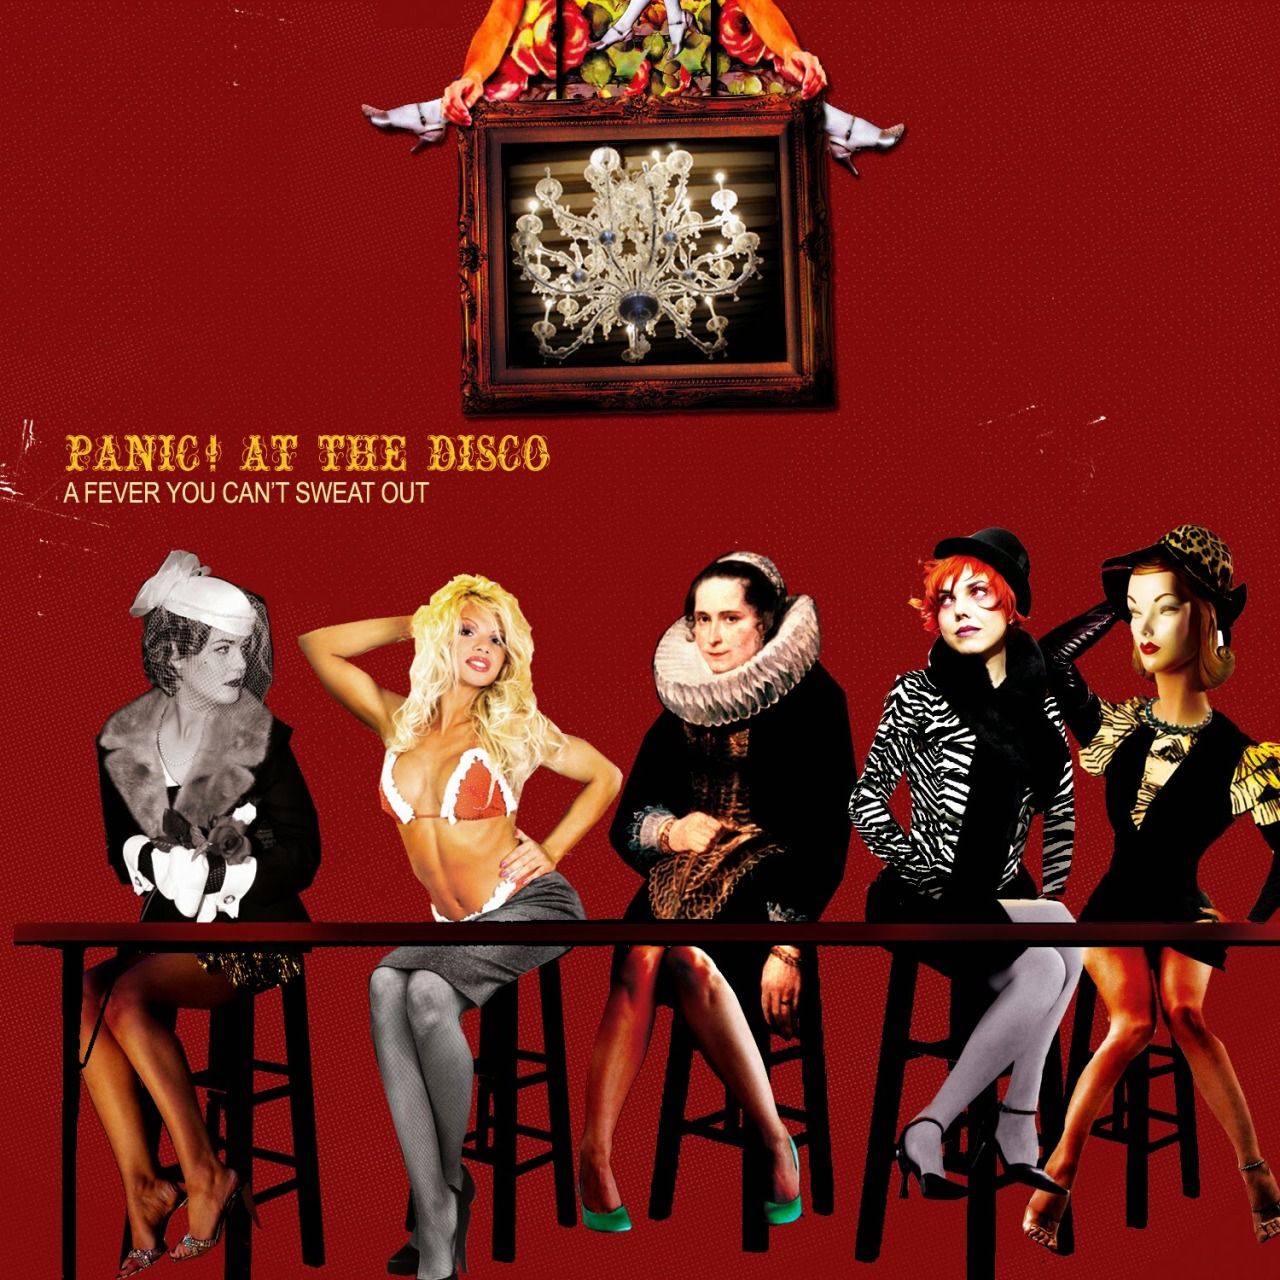 tagged by @coryellison to share the 6 albums I’ve been listening to lately, thank you!!you’ve literally caught me in the middle of my panic! at the disco nostalgia spiral so there’s uhhh gonna be a bit of that1. a fever you can’t sweat out - panic! at the disco (aka probably my favorite album ever)2. death of a bachelor - panic! at the disco3. the spark - enter shikari4. i spent the winter writing songs about getting better - proper. (linking this one because they’re so!! underrated!! and it’s a crime!!)5. too weird to live, too rare to die! - panic! at the disco6. scaled and icy - twenty one pilotsnot tagging anyone but anyone who wants to--consider yourself tagged (and tag me, i wanna See) #oh werent you a mumford stan-- new year new me okay  #and by new i mean. high school me apparently  #god ive already ruined my spotify wrapped with all this p!atd  #not to be like so many p!atd songs remind me of beard and thats why im in so deep rn--but im also not not saying that  #anyway thanks for the tag!! #personal